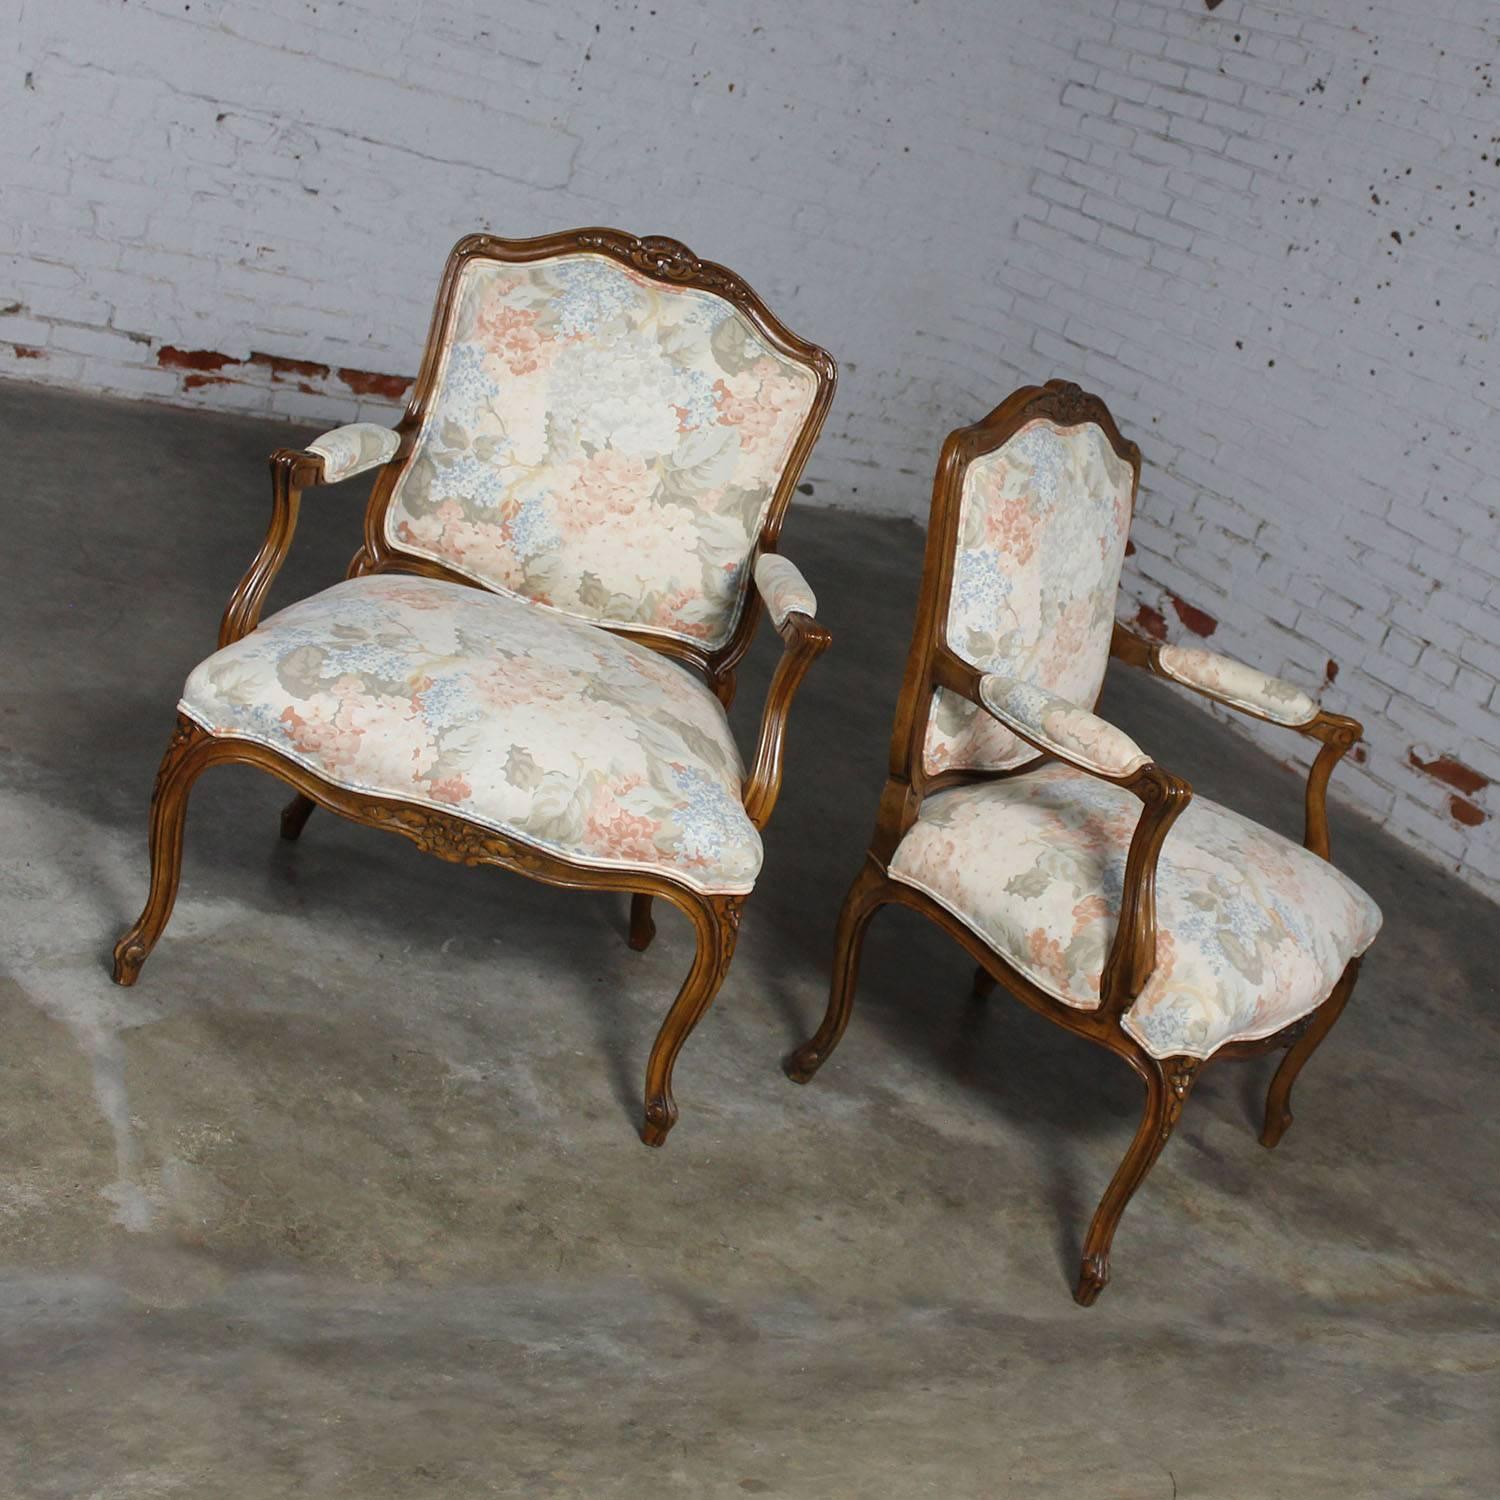 Beautiful pair of Louis XV style fauteuil armchairs. This lovely pair are, circa 1962 by Heritage Furniture and in awesome vintage condition with a gorgeous pastel French Country style upholstery.

This wonderful pair of fauteuil chairs in a Louis